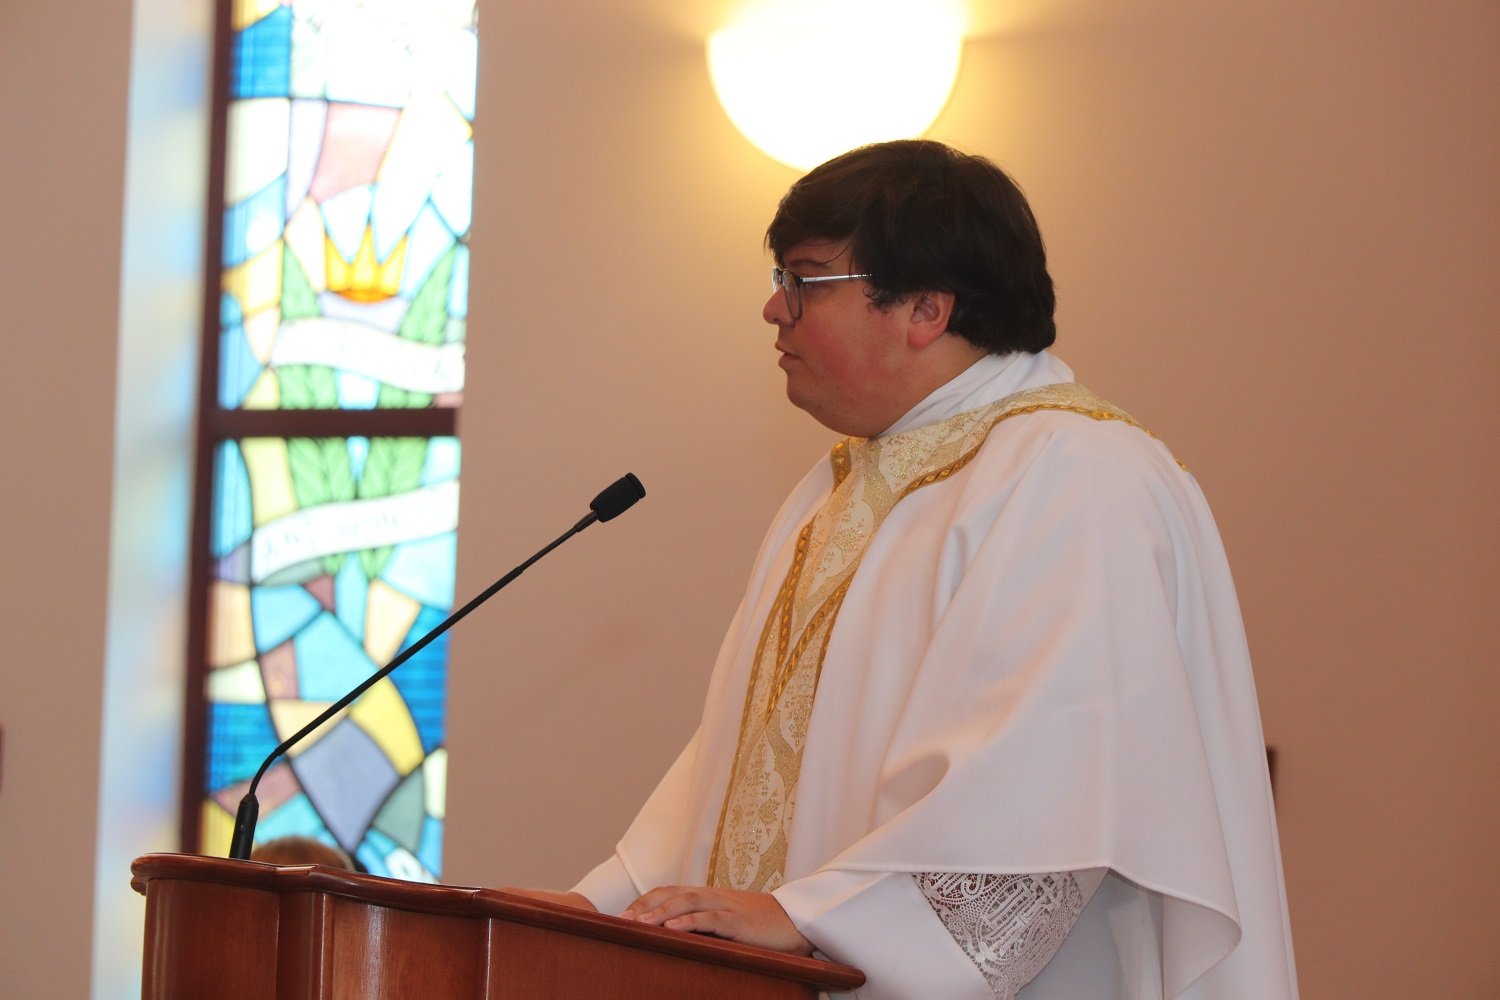  Fr. Paul Cygan (diocese of Buffalo, NY), a childhood friend of Sr. Frances Marie, preached a beautiful homily 